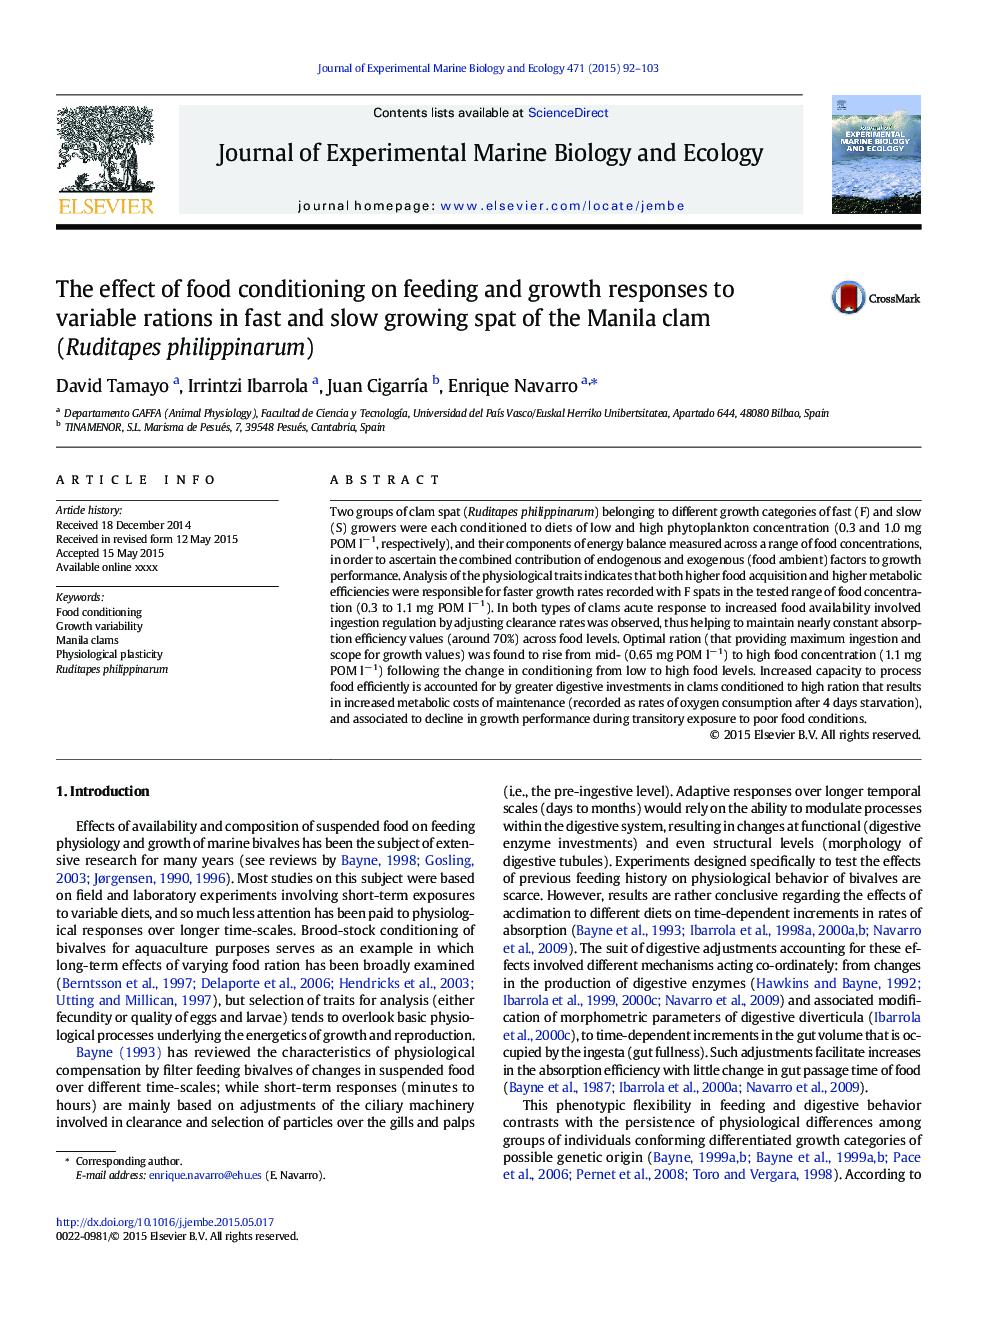 The effect of food conditioning on feeding and growth responses to variable rations in fast and slow growing spat of the Manila clam (Ruditapes philippinarum)